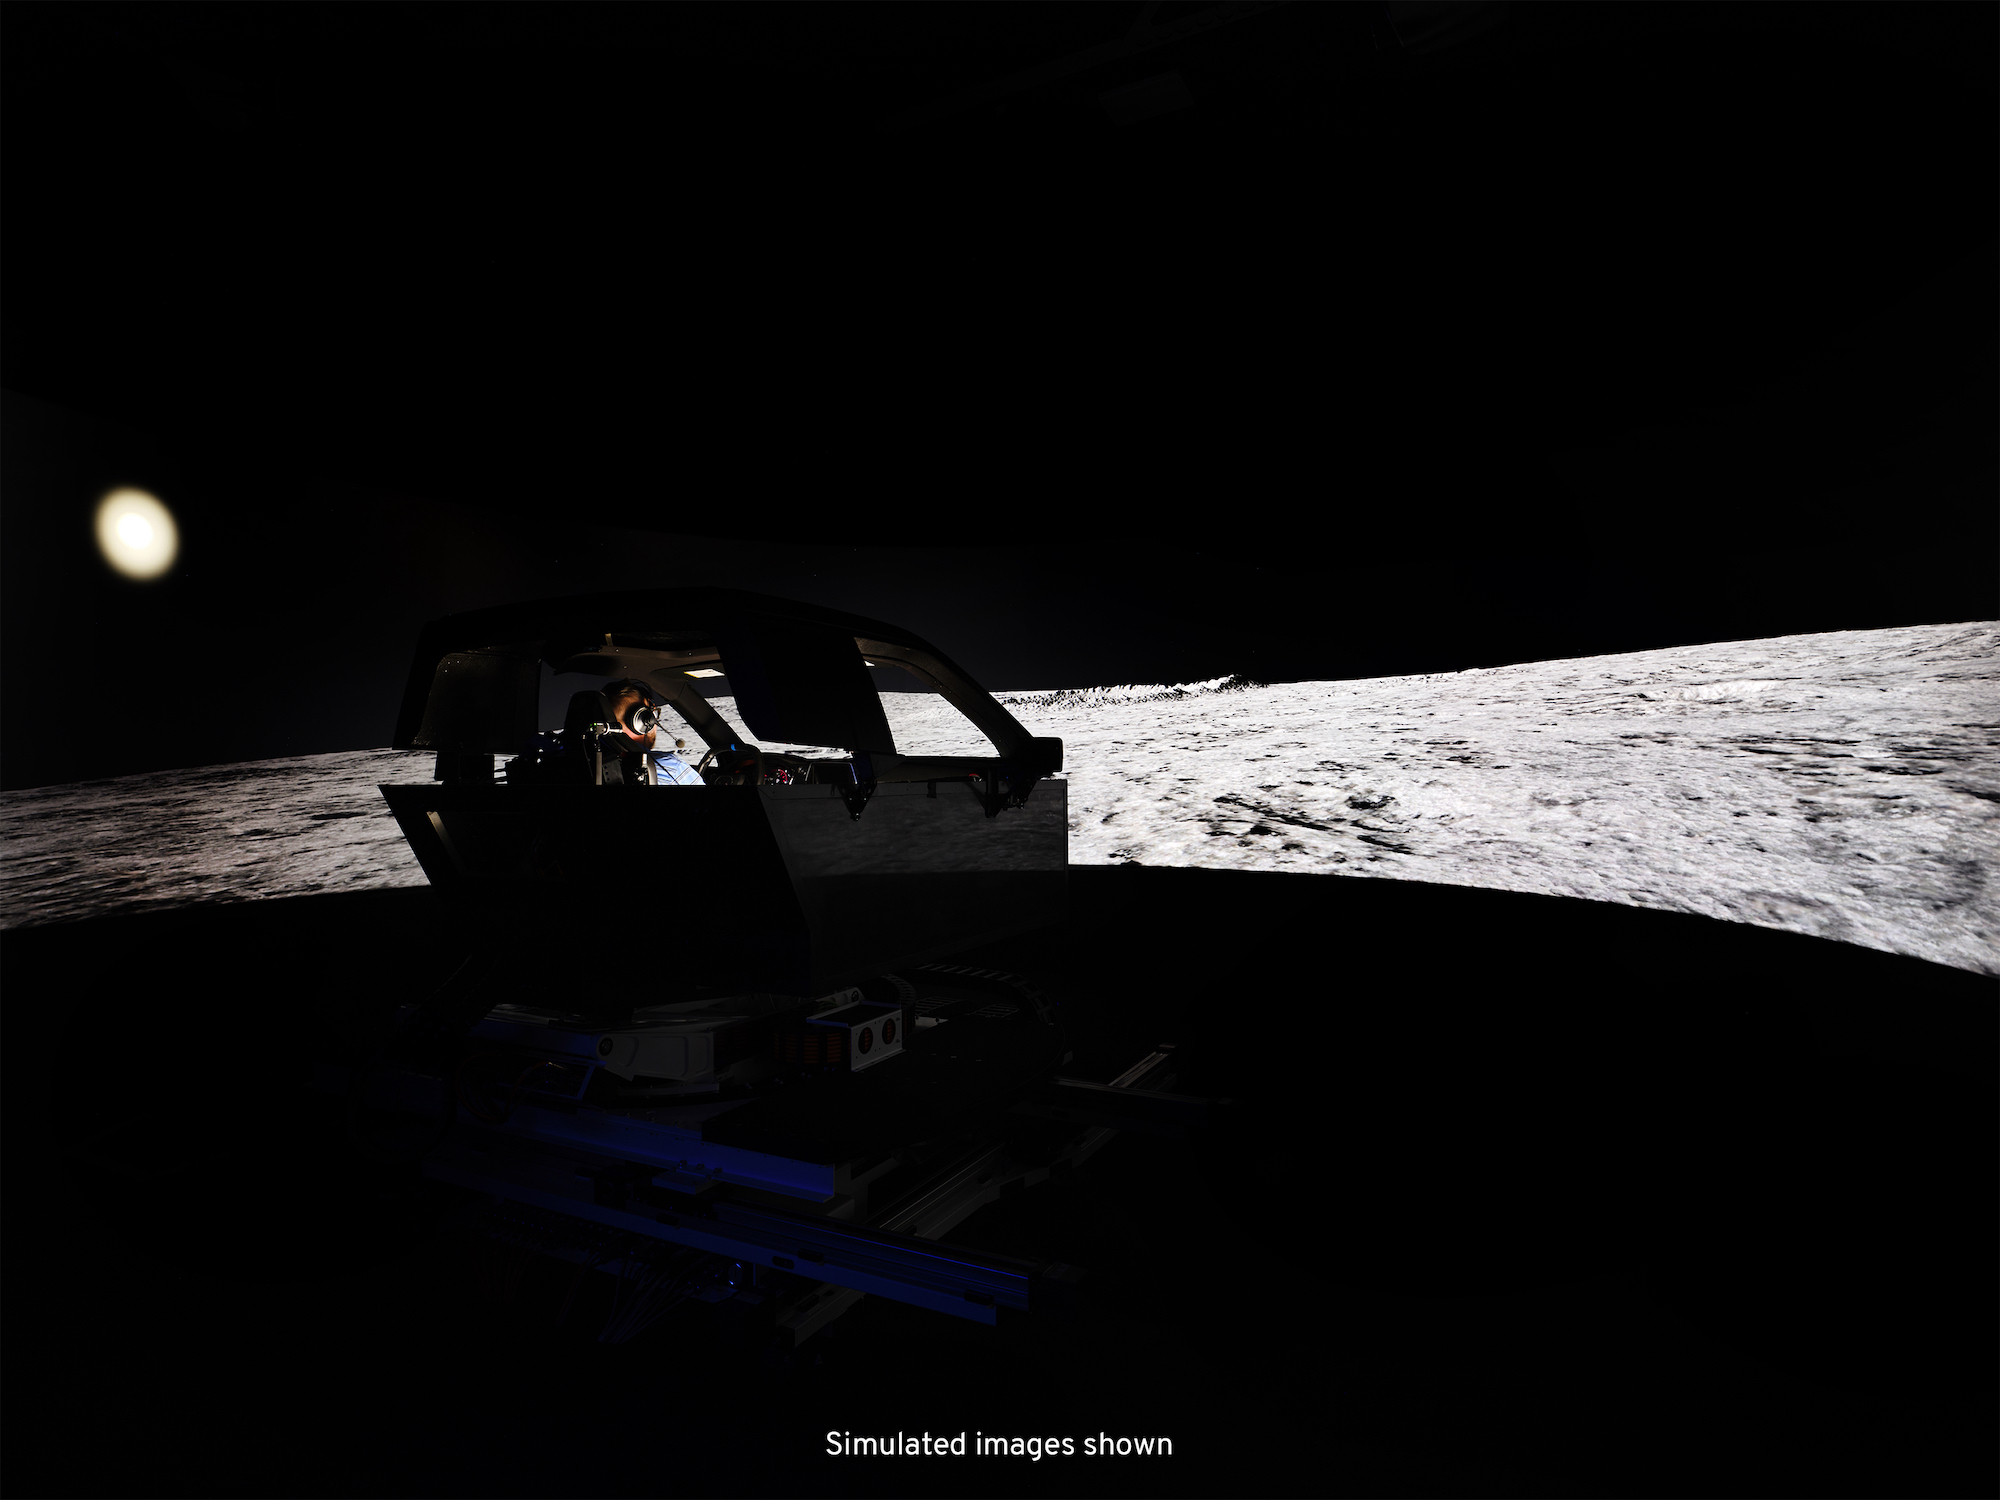 Here’s what it’s like to drive on the moon